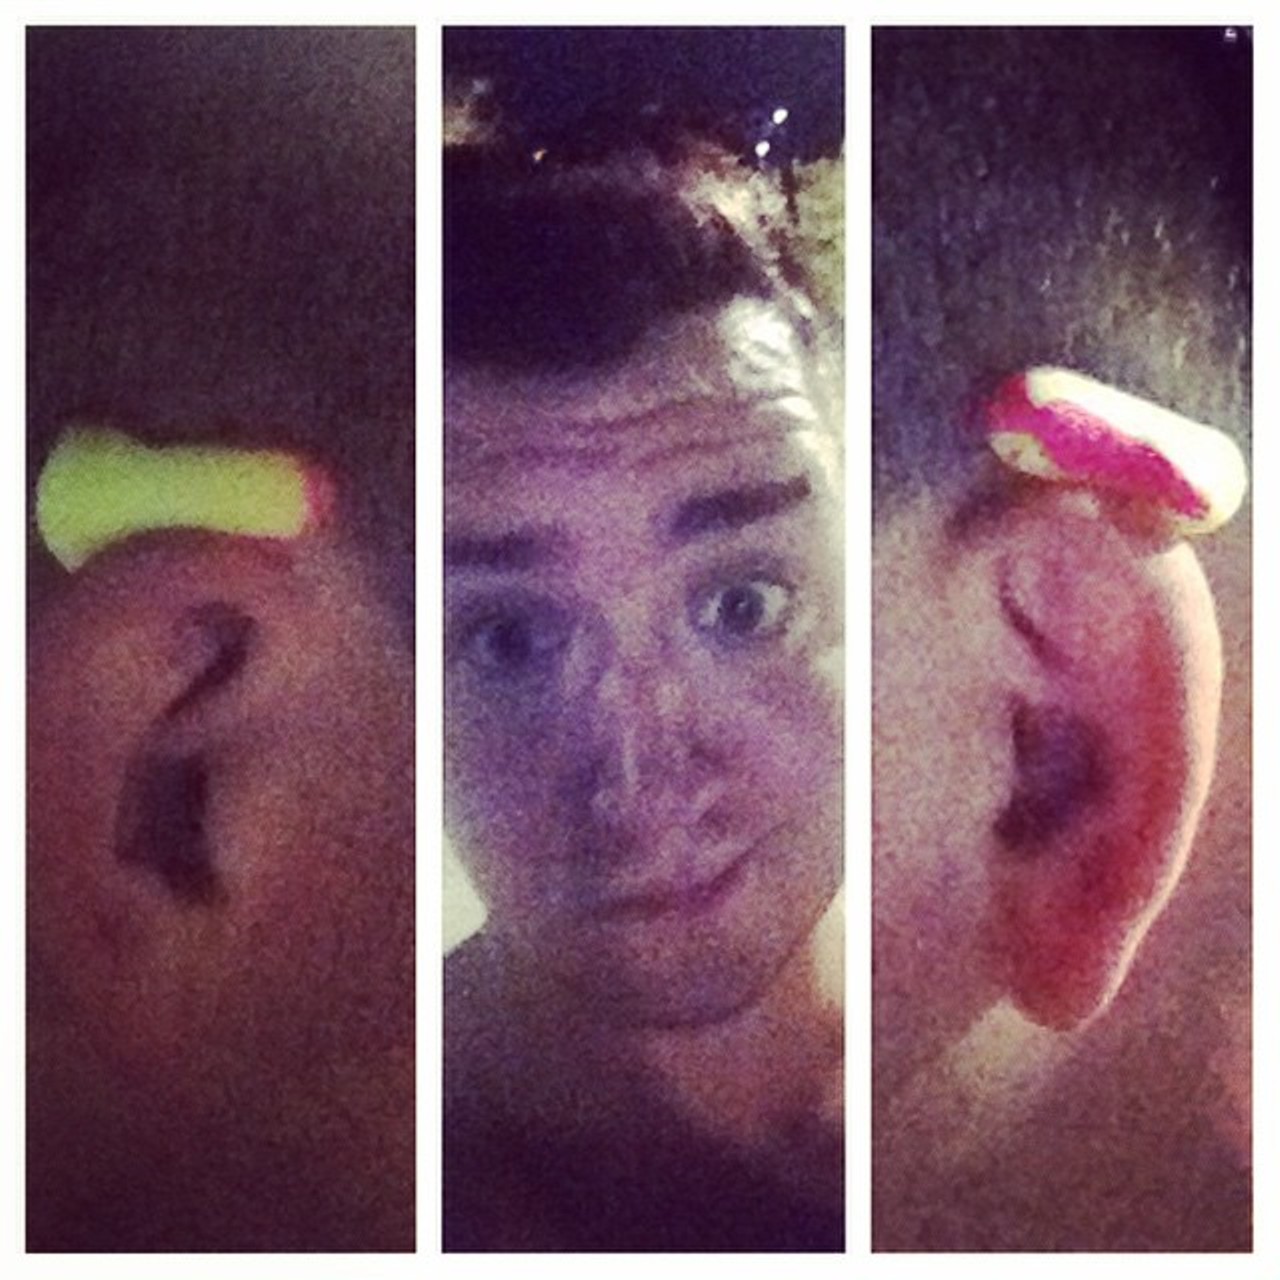 Earplugs become your best friends.
Photo via coltonbrooks on Instagram